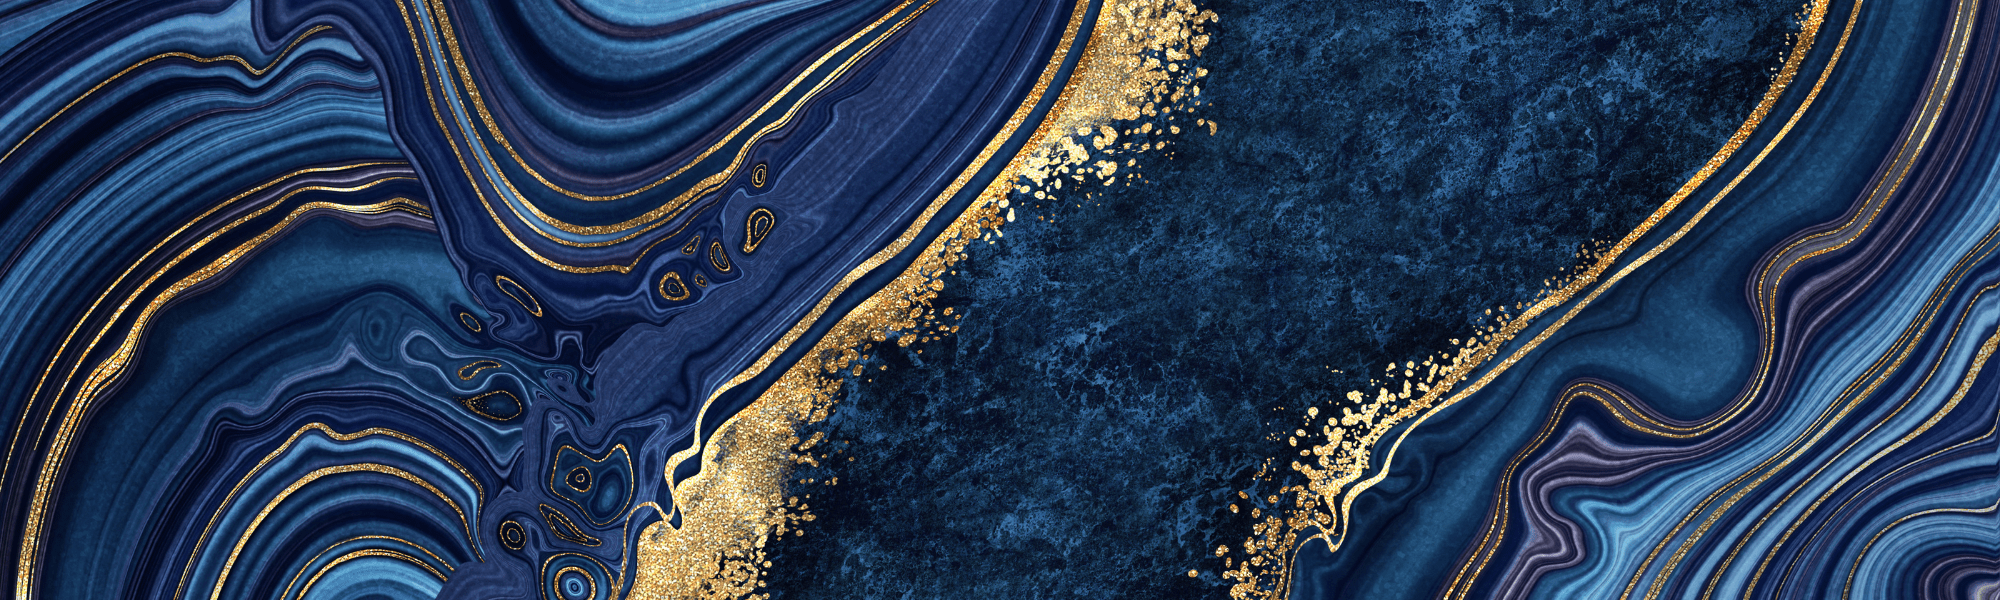 Navy and gold marble pattern.